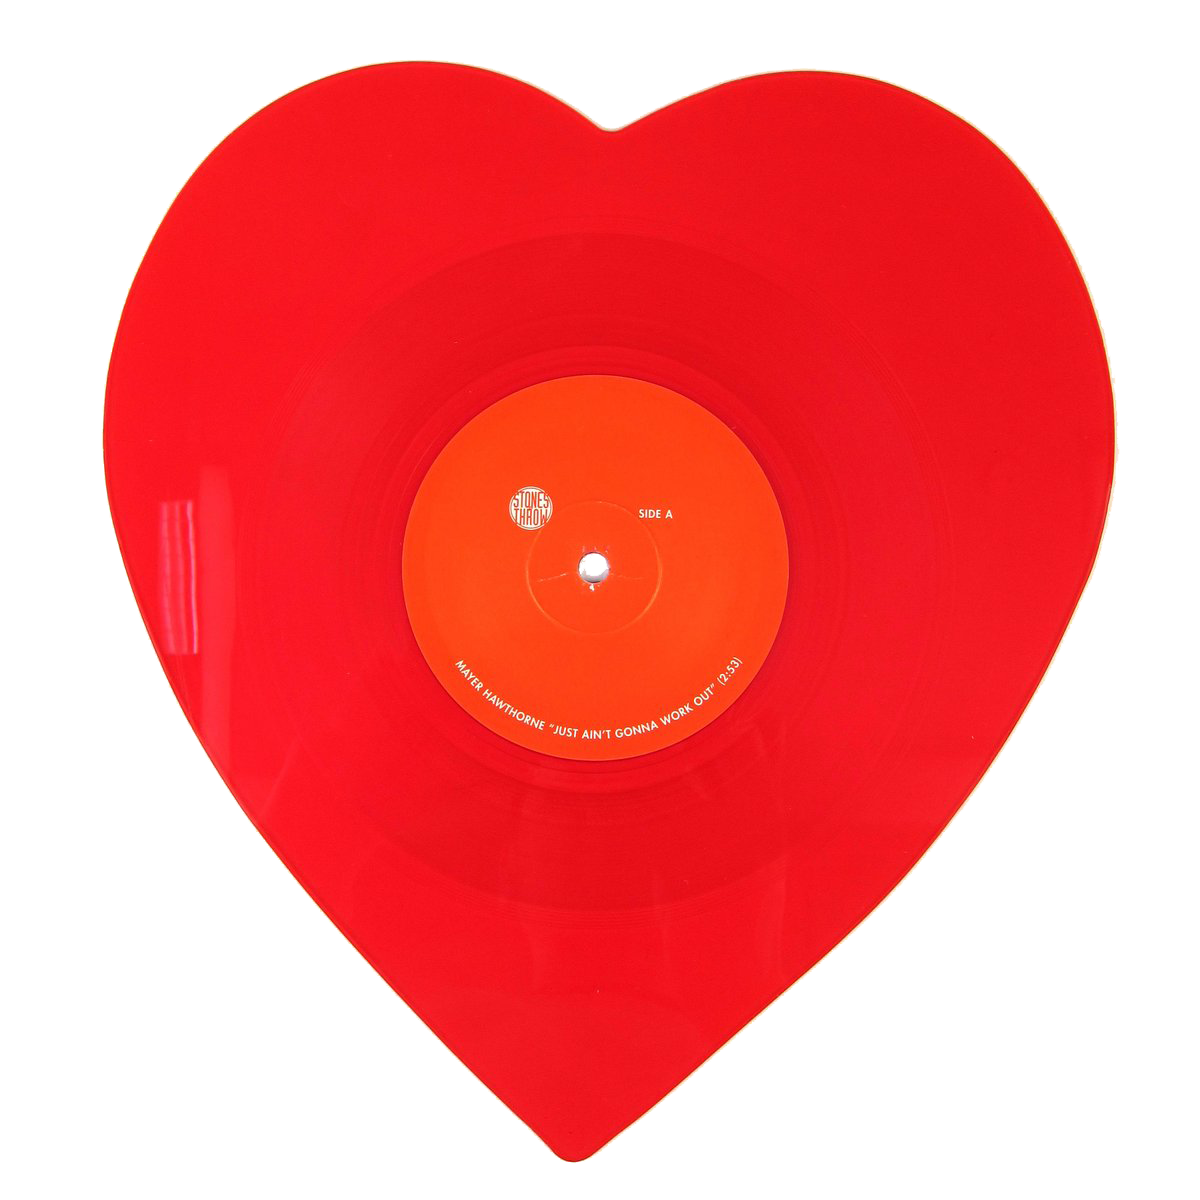 Just Ain't Gonna Work Out 10" Heart Shaped Vinyl